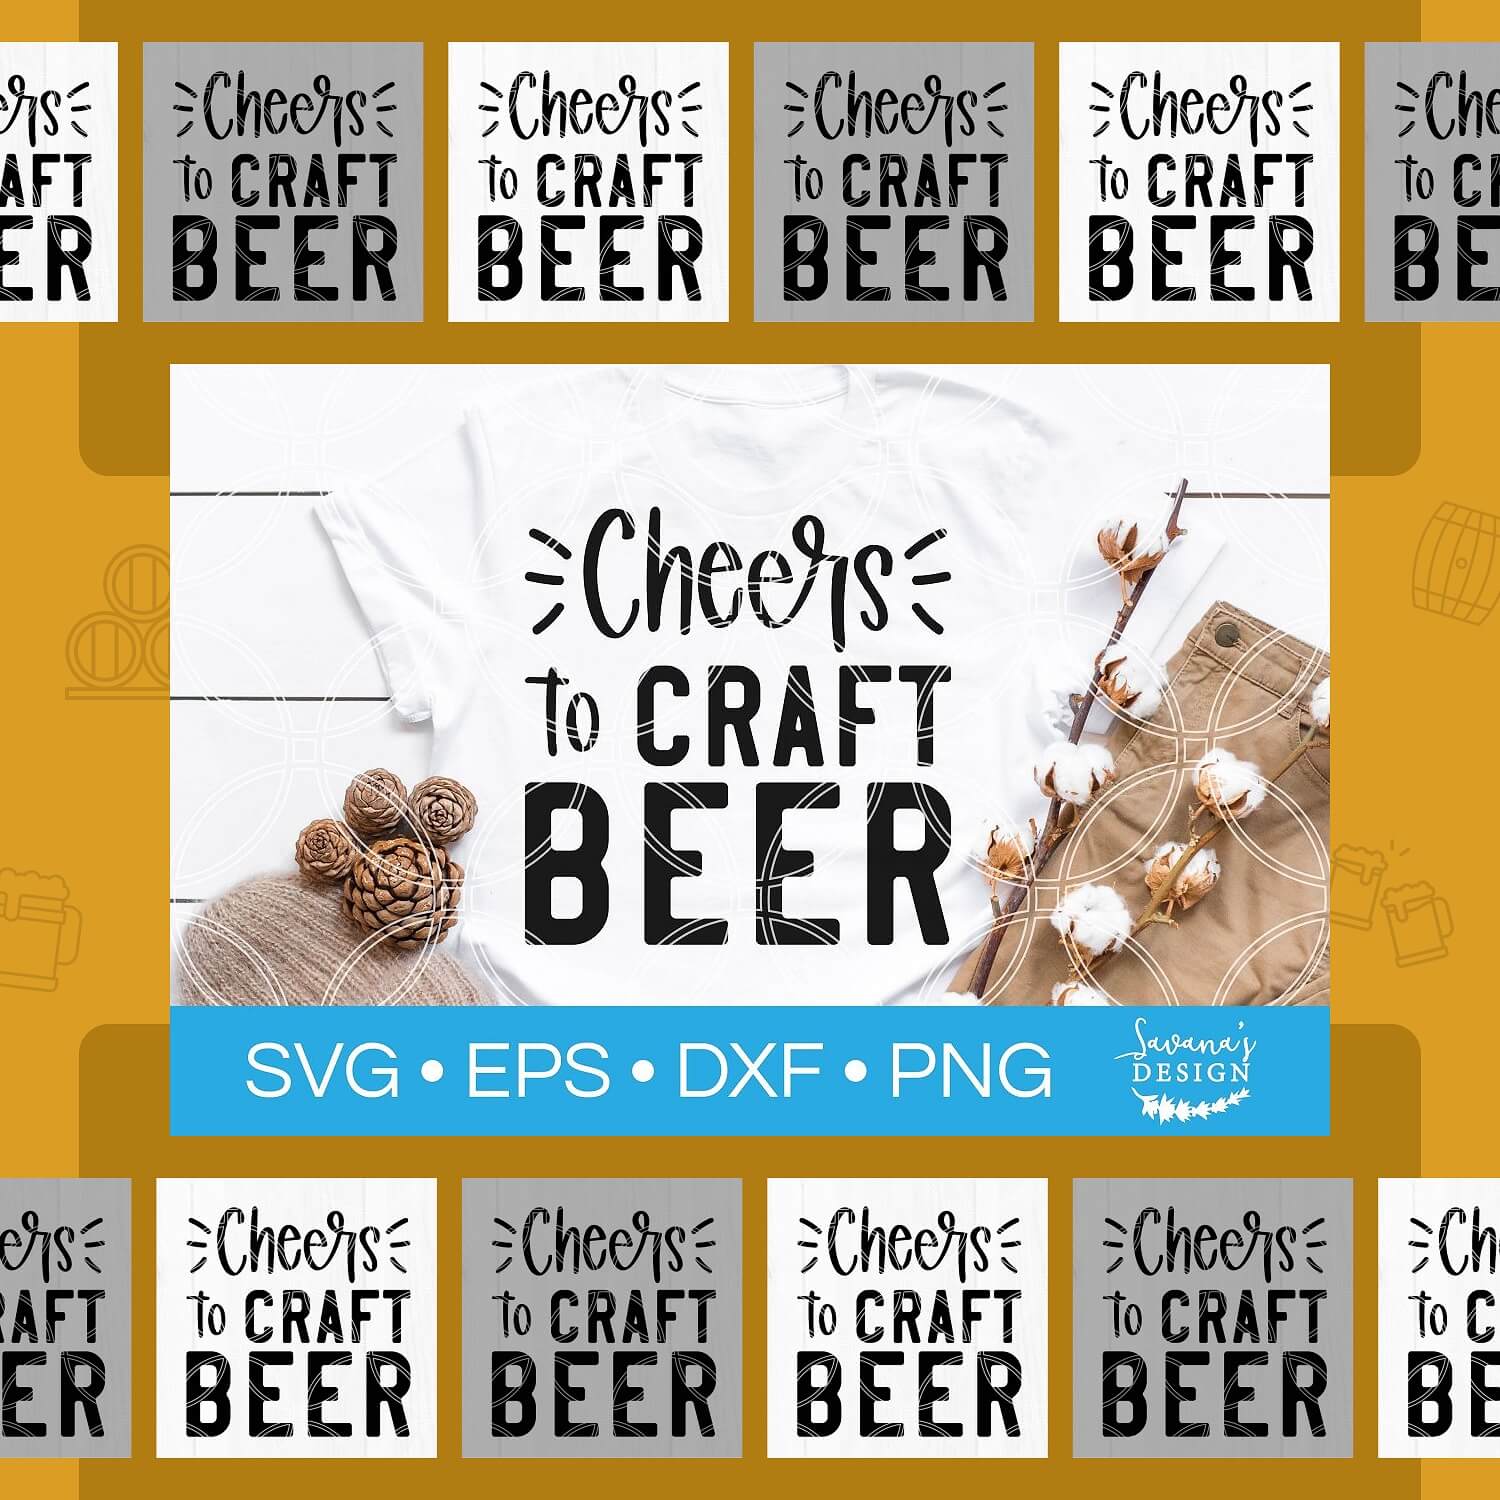 Inscription "Cheers to craft beer" on the white and grey backgrounds.